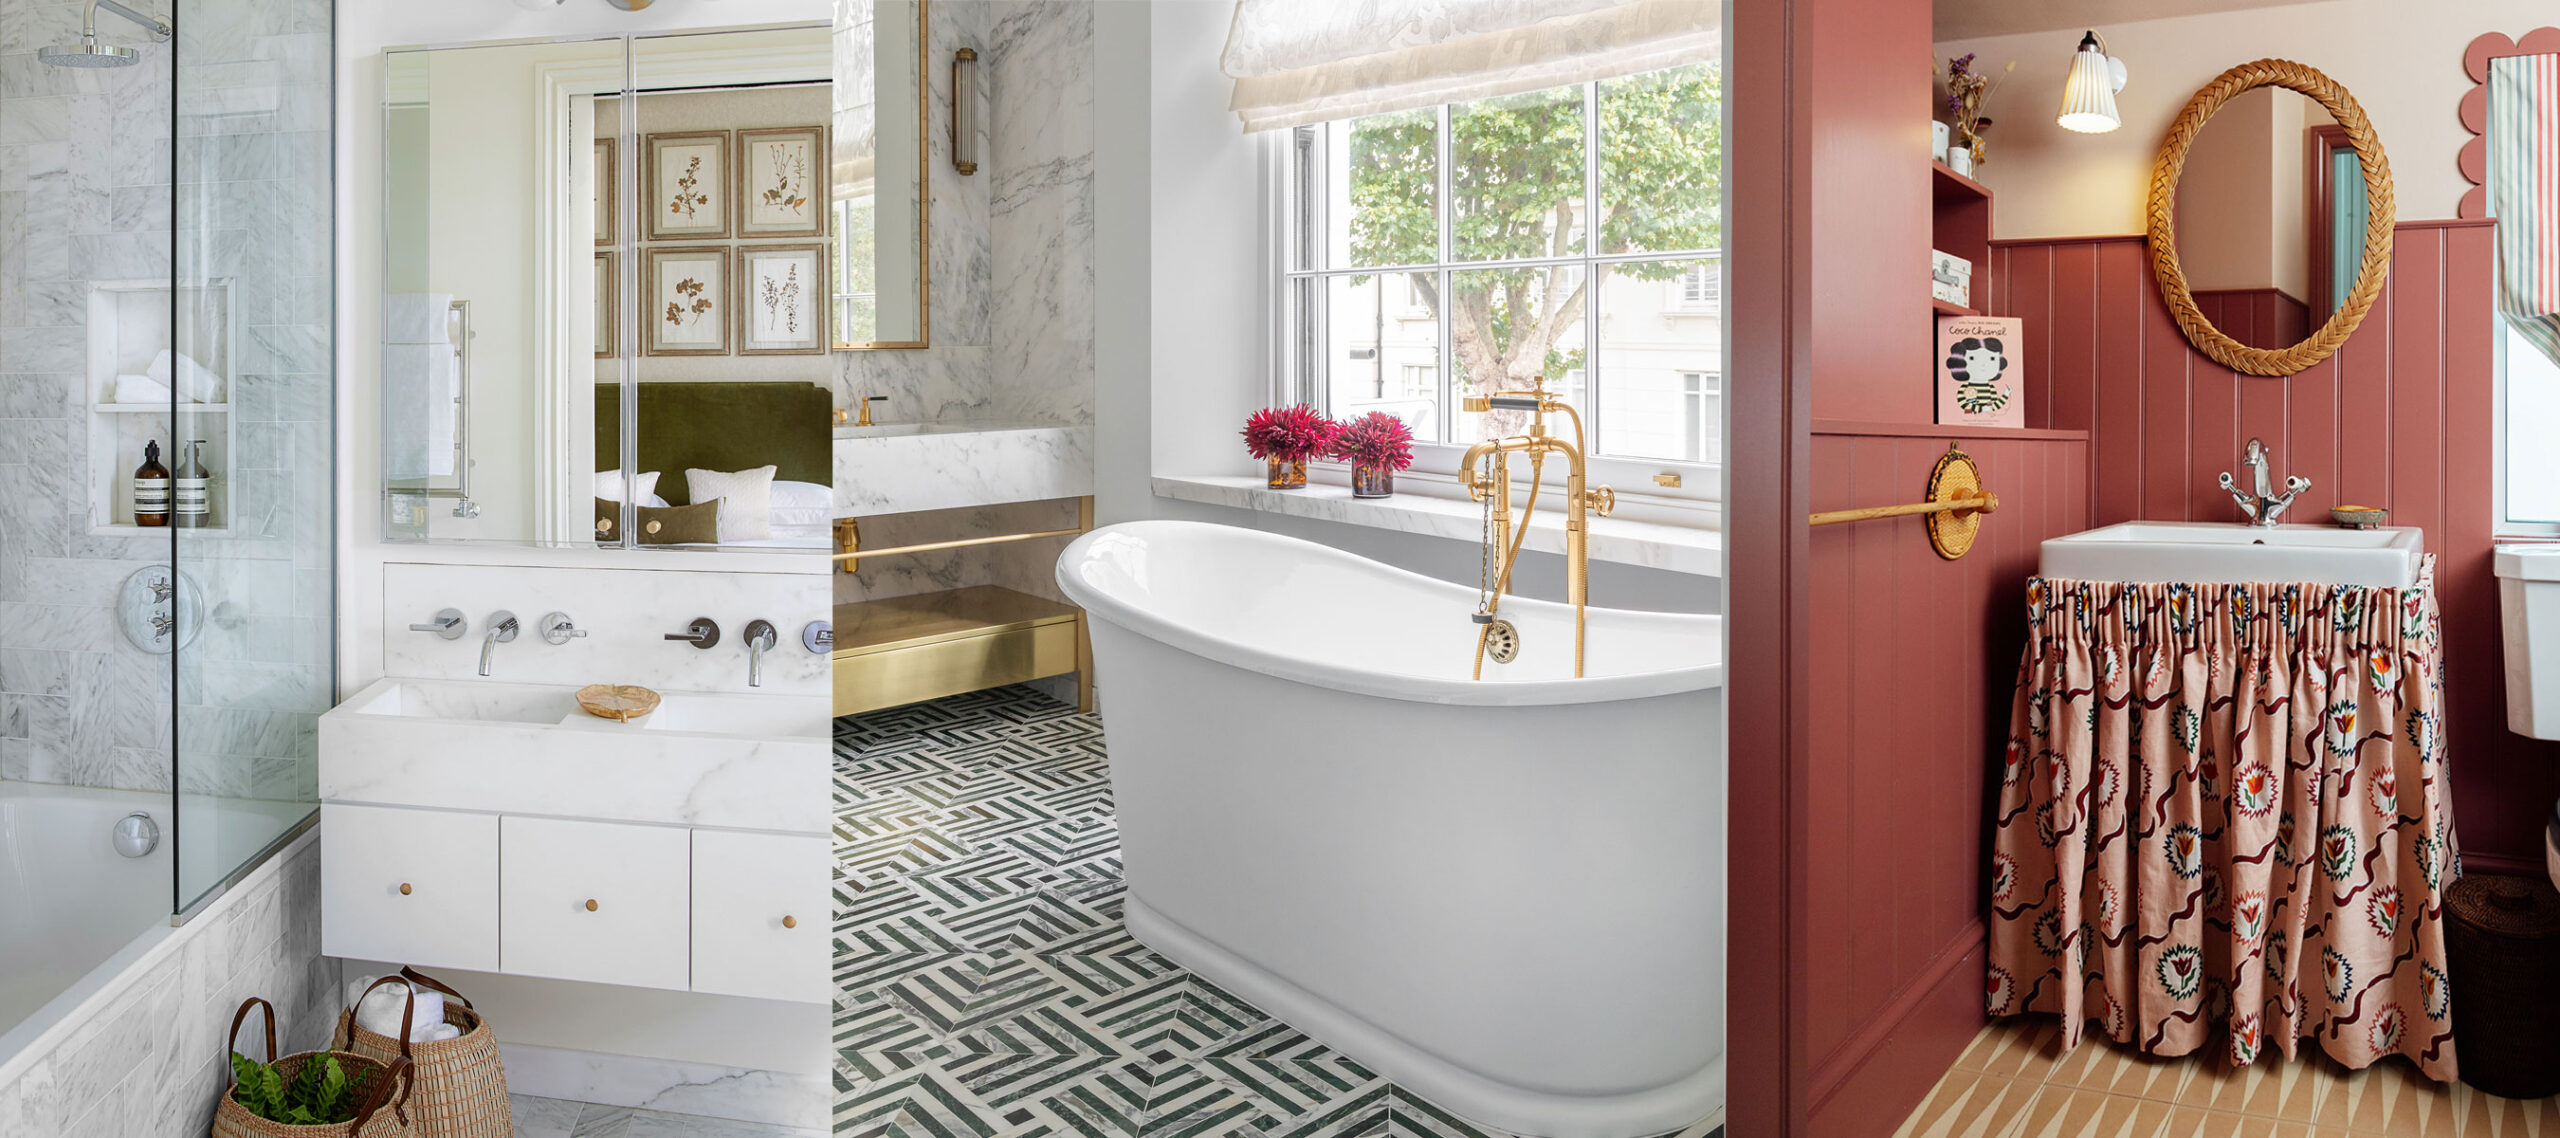 5 Budget-Friendly Ideas To Spruce Up Your Bathroom